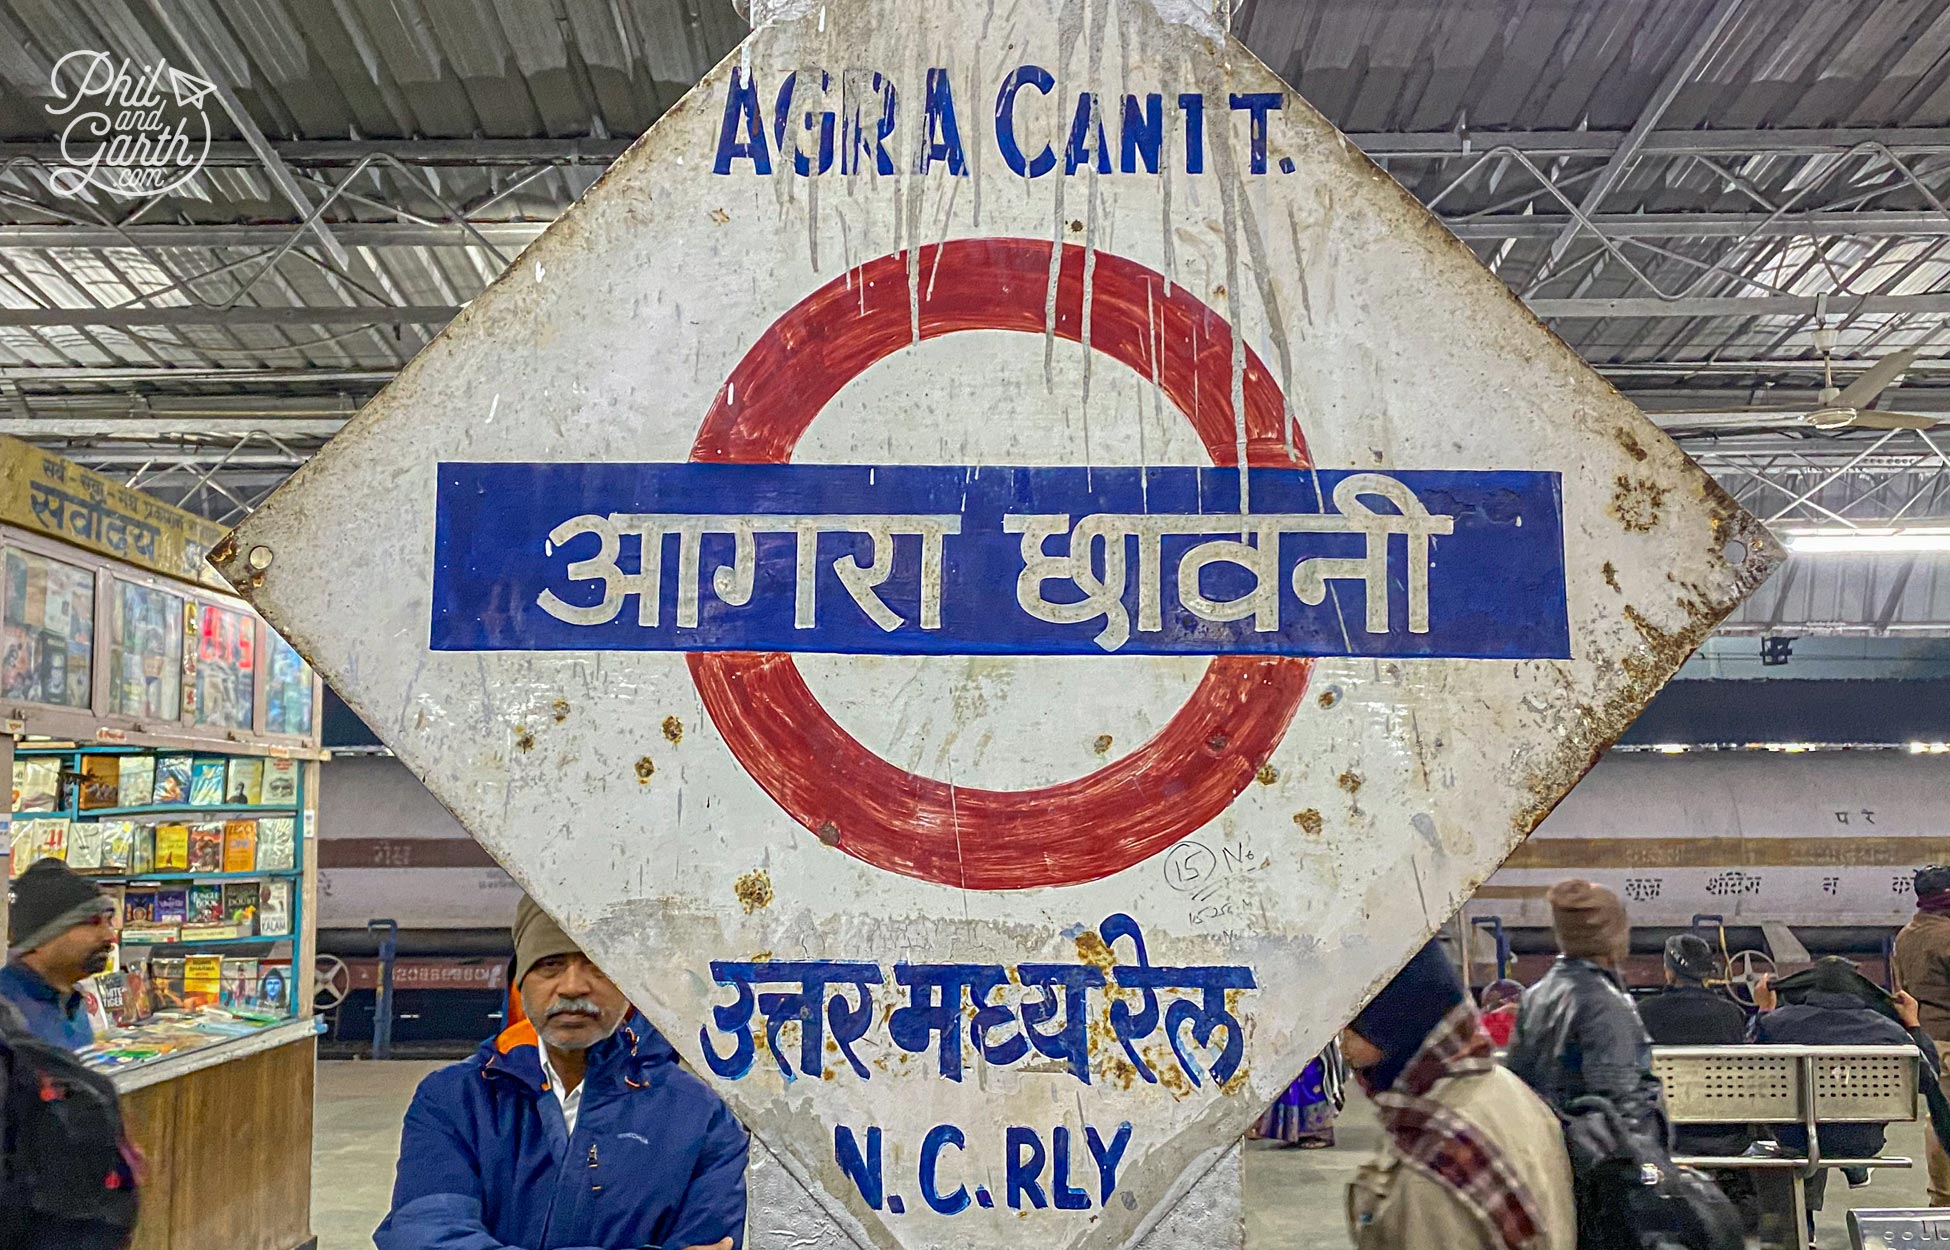 We've arrived at Agra Cantt railway station